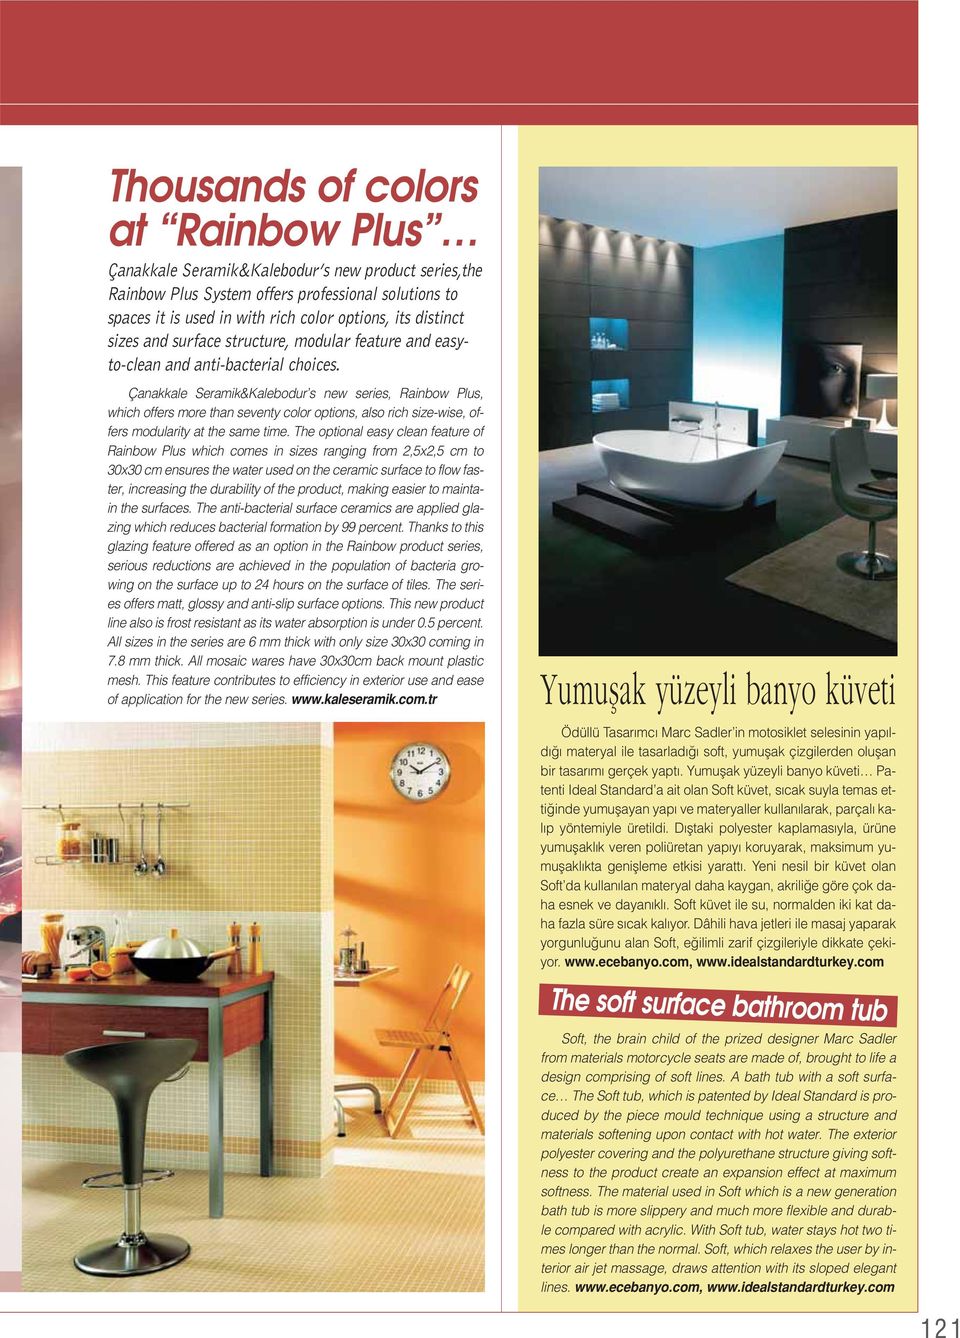 Çanakkale Seramik&Kalebodur s new series, Rainbow Plus, which offers more than seventy color options, also rich size-wise, offers modularity at the same time.